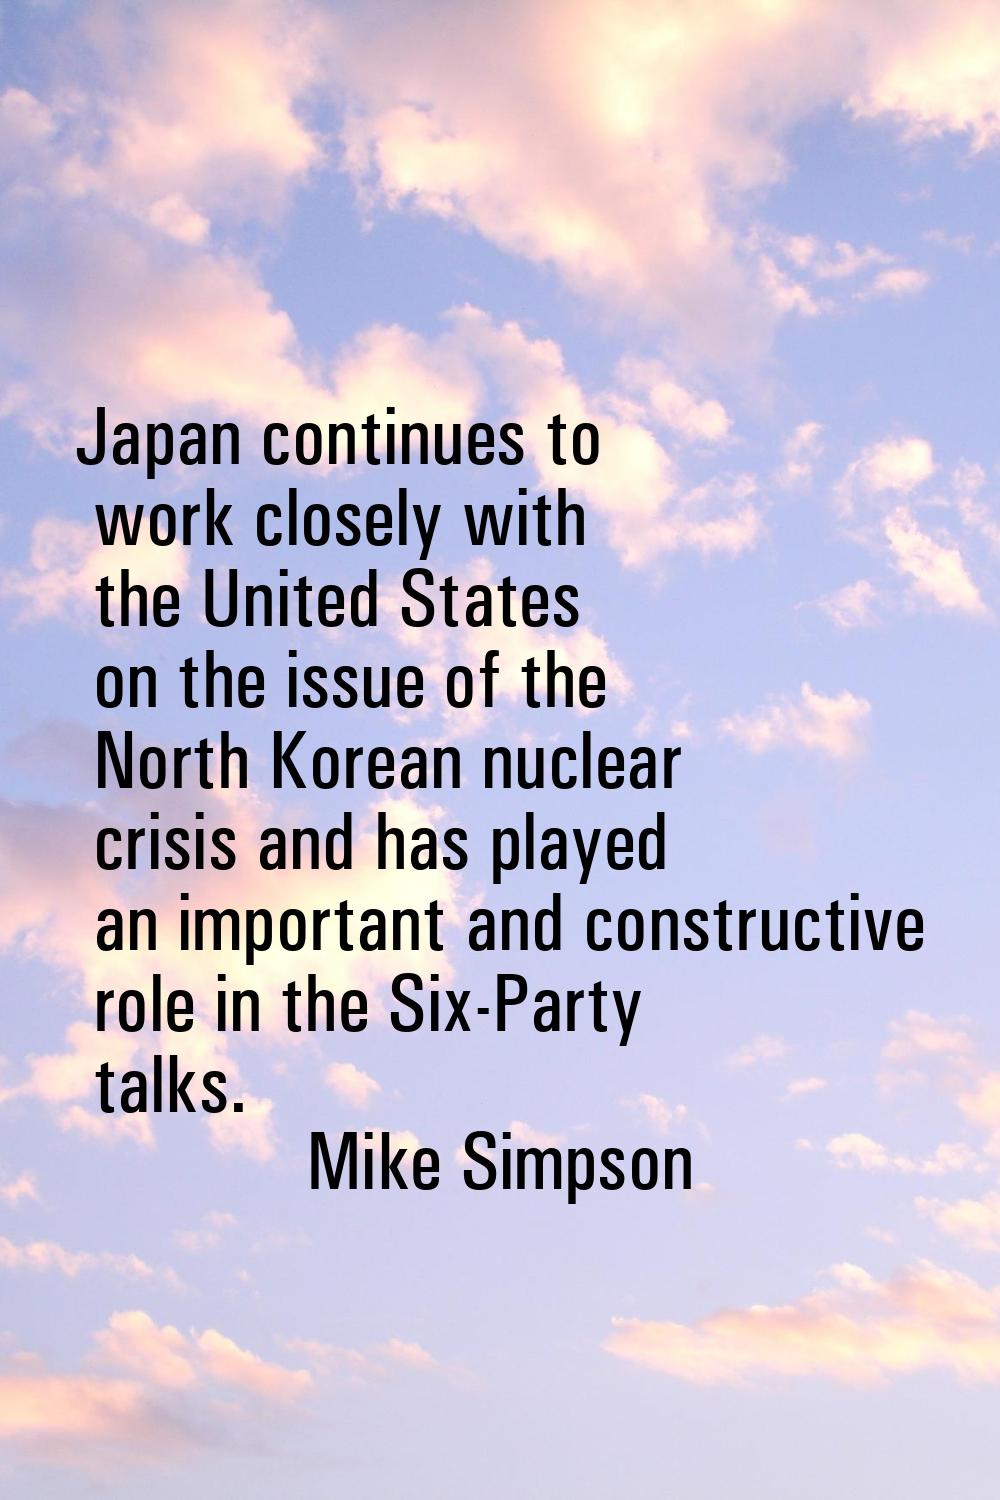 Japan continues to work closely with the United States on the issue of the North Korean nuclear cri